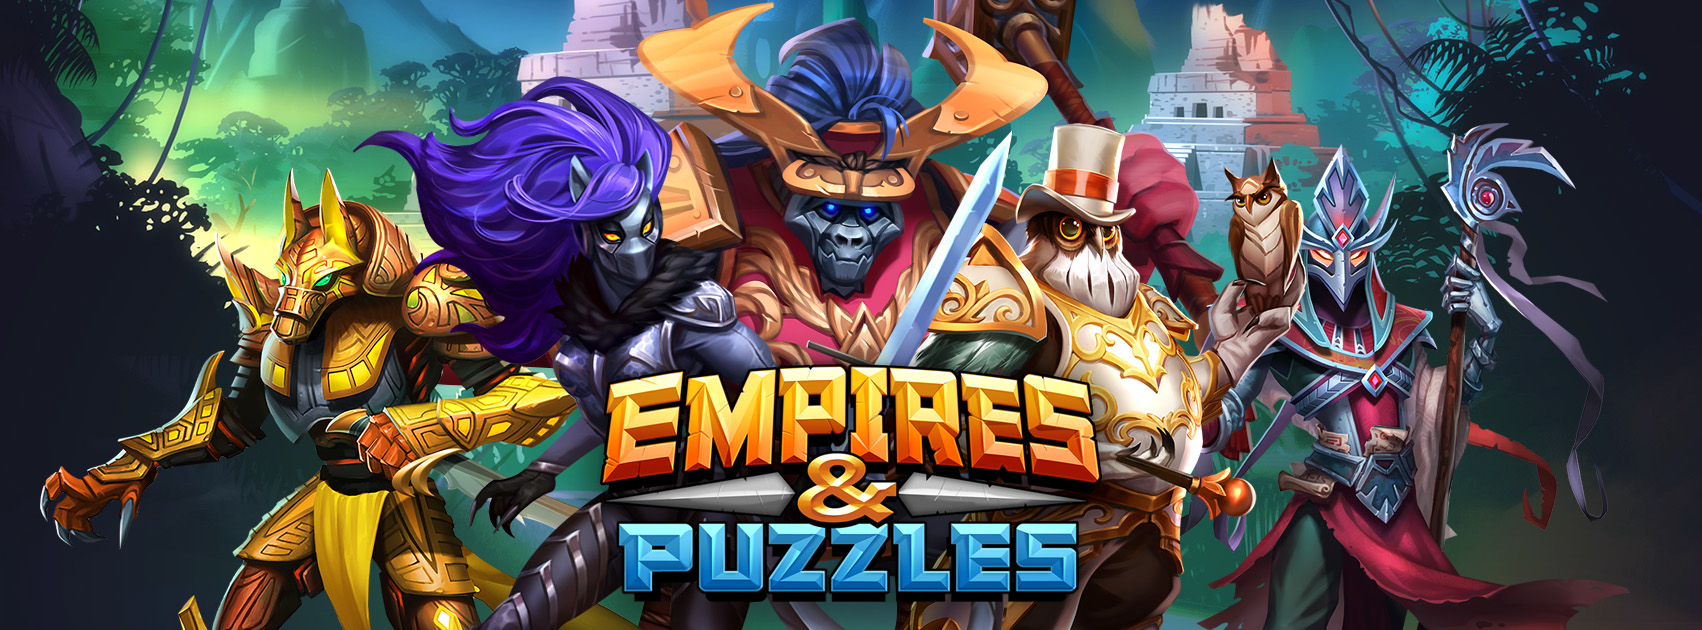 empires and puzzles forge levels wiki